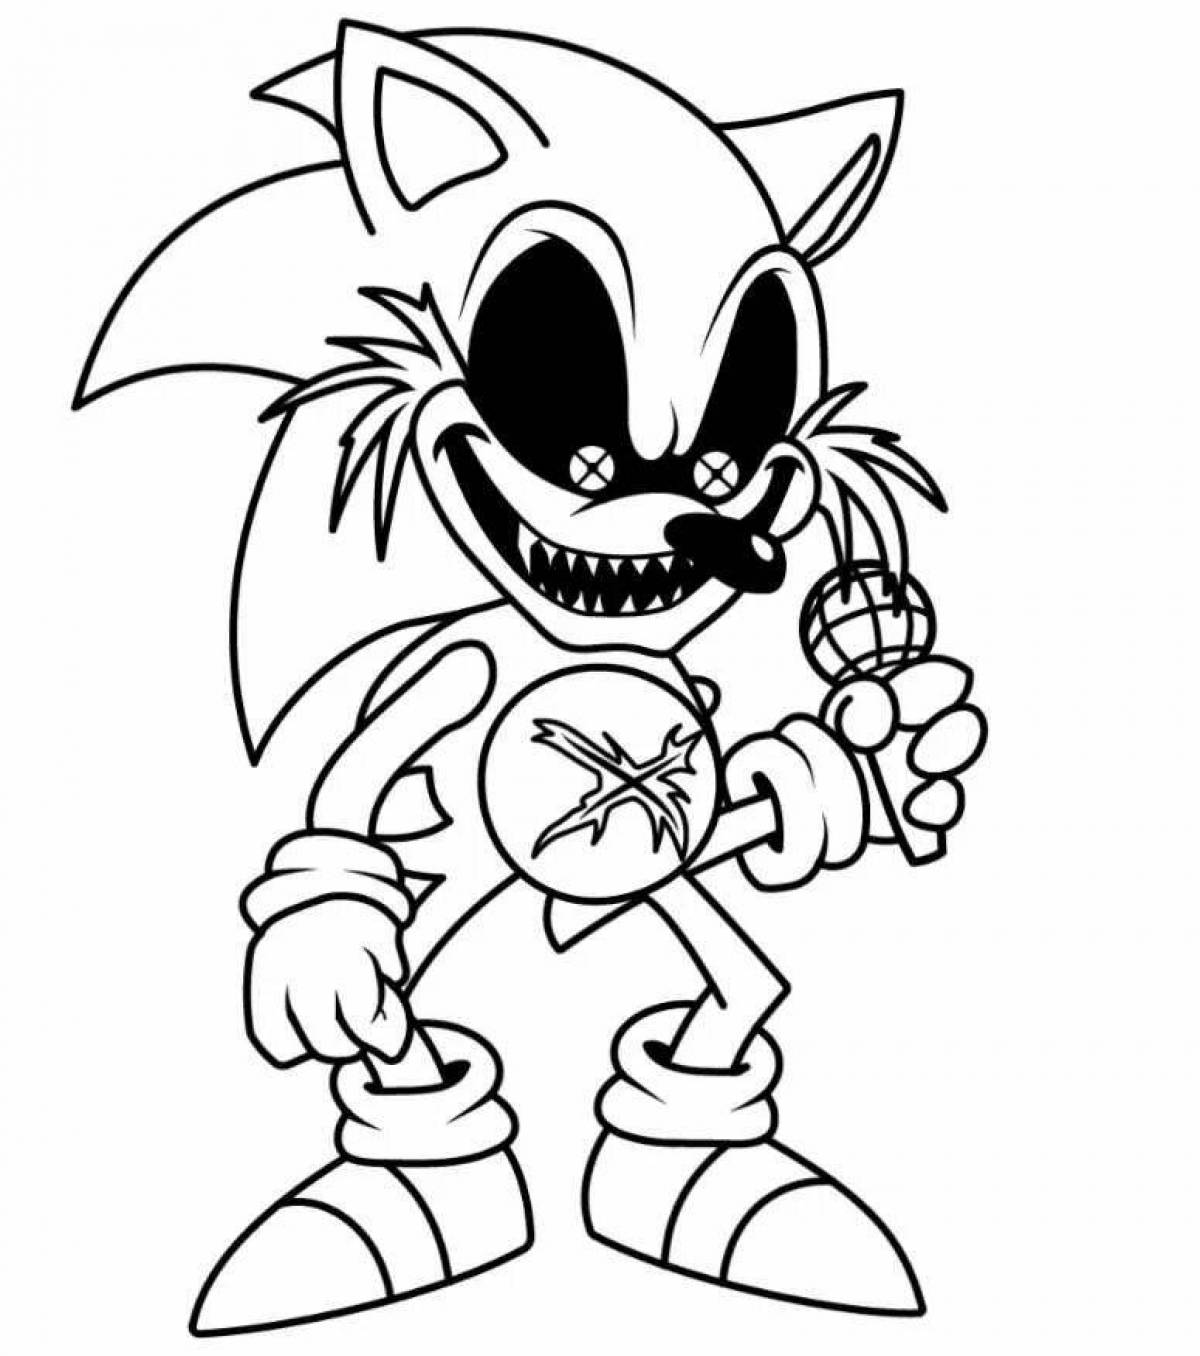 Cool sonic egze coloring page